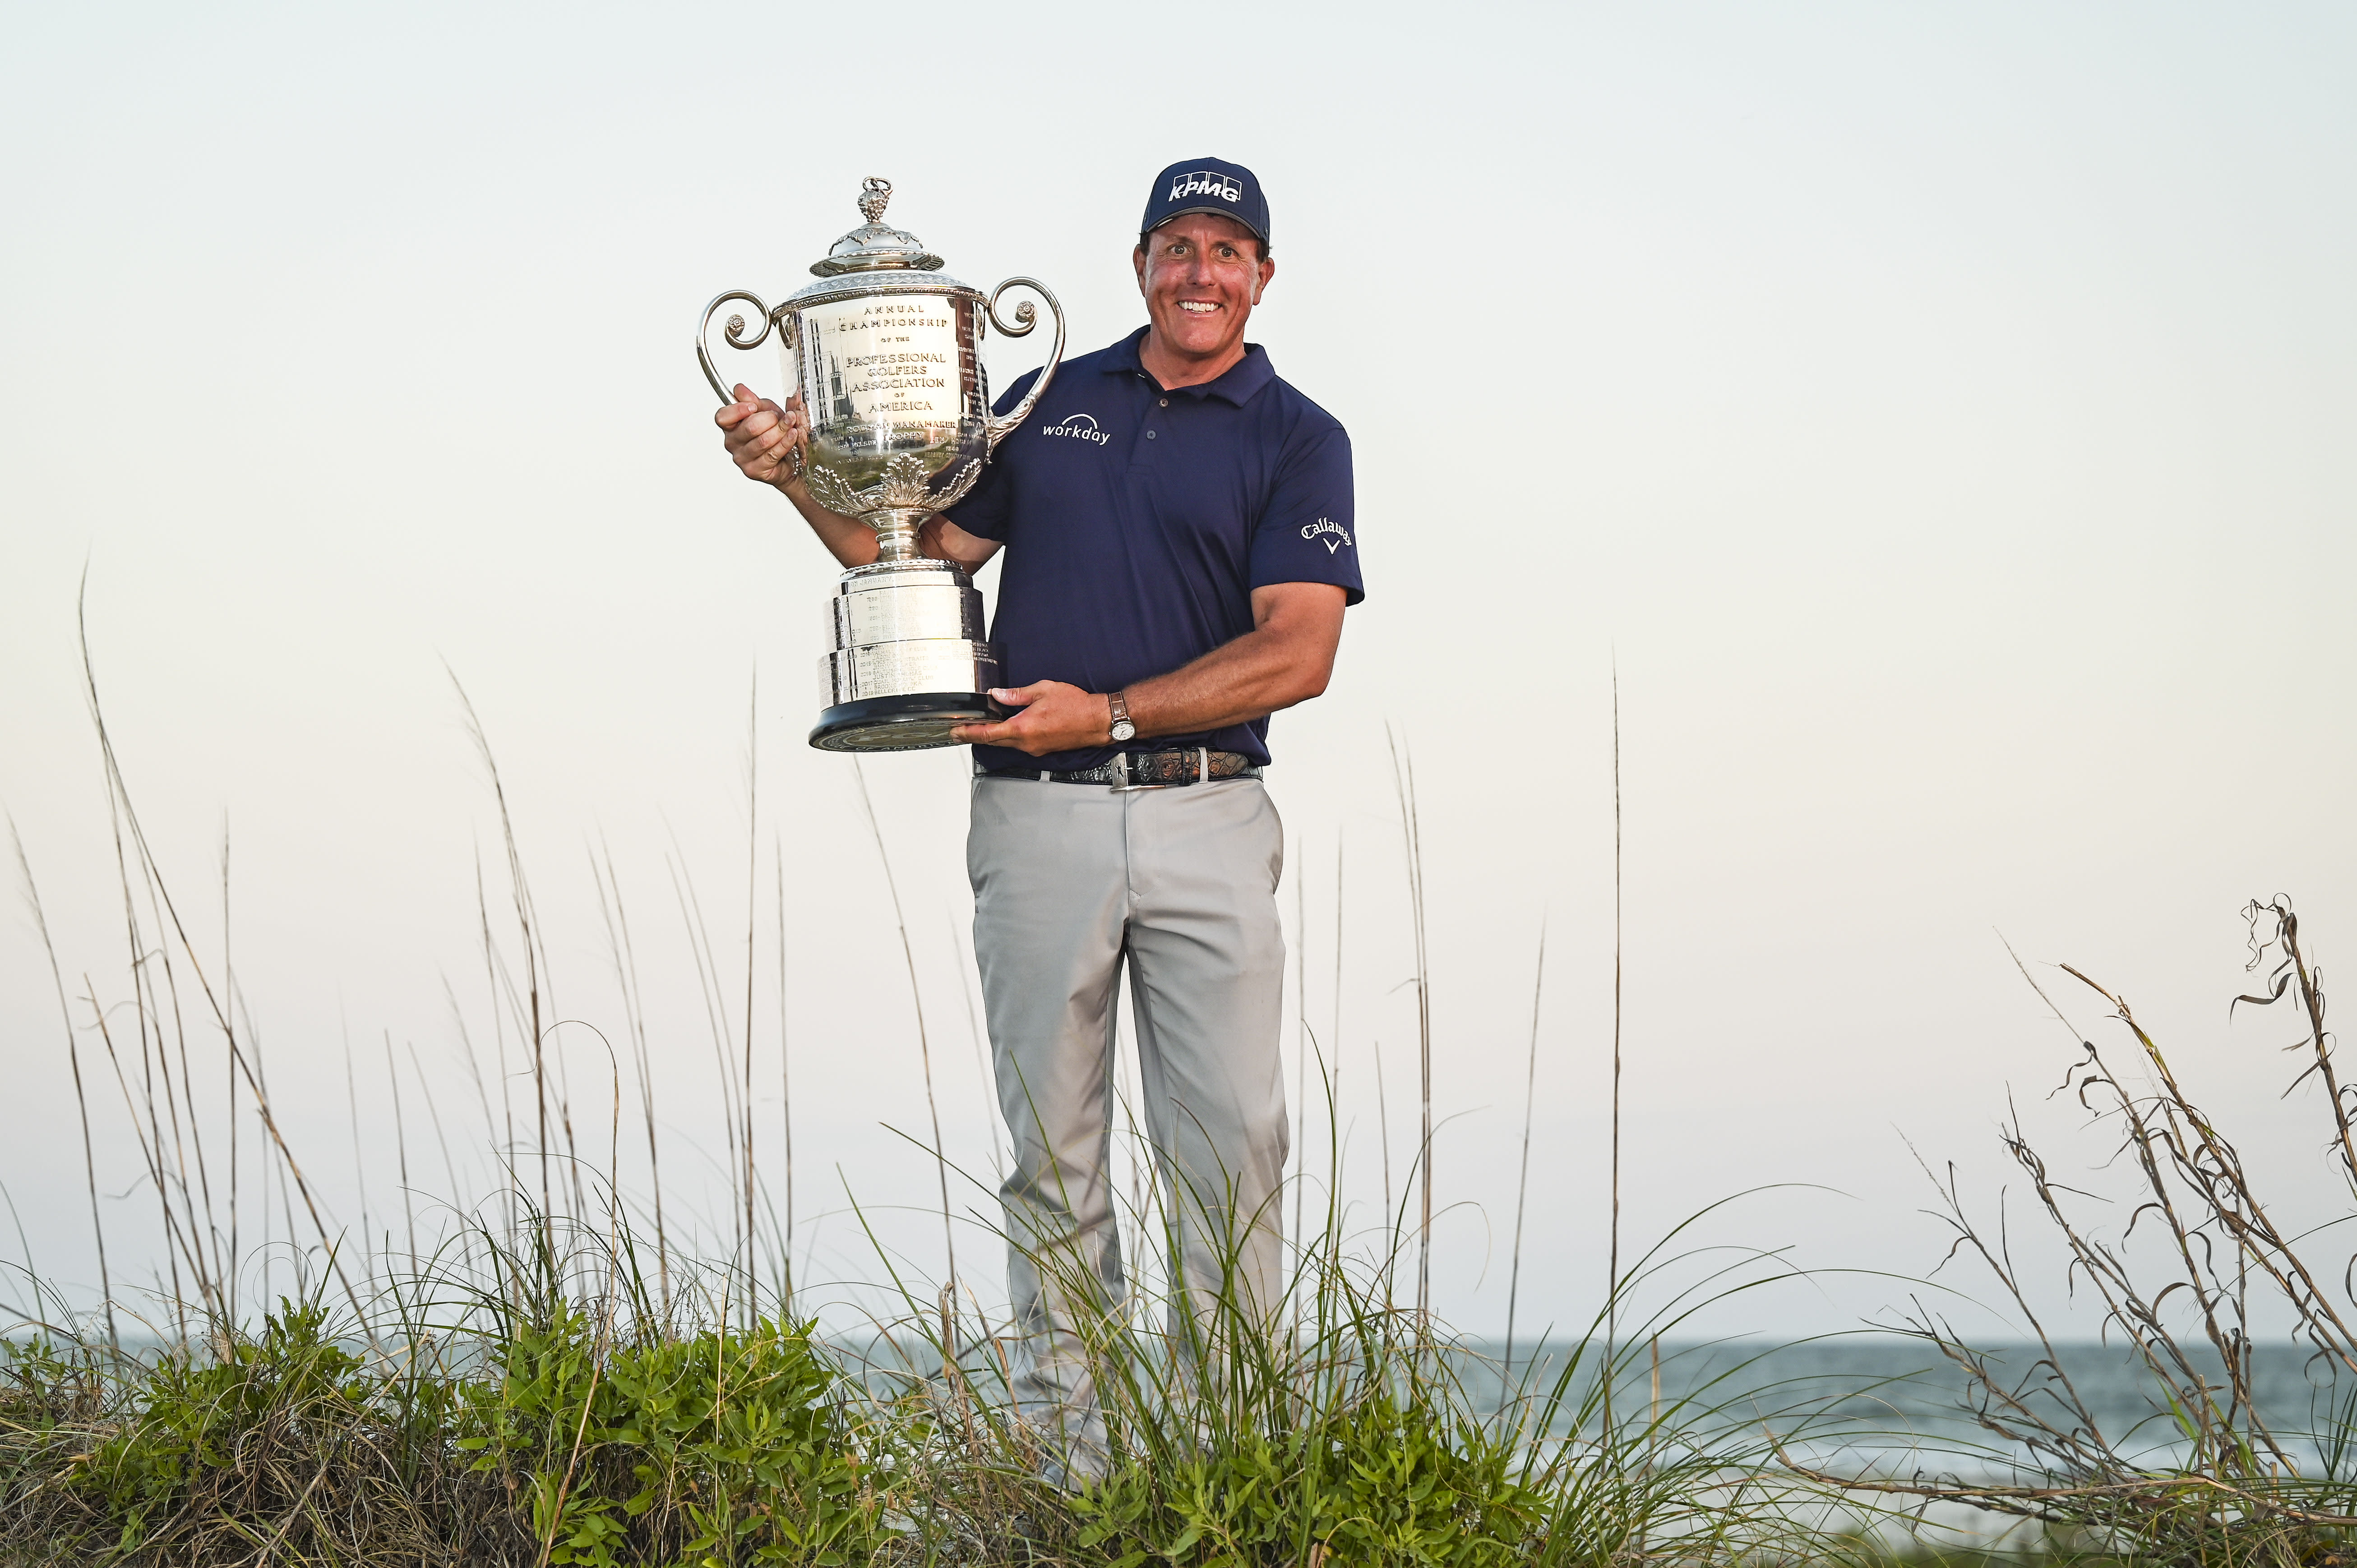 Phil Mickelson's PGA Championship win attracted 6.5 million viewers